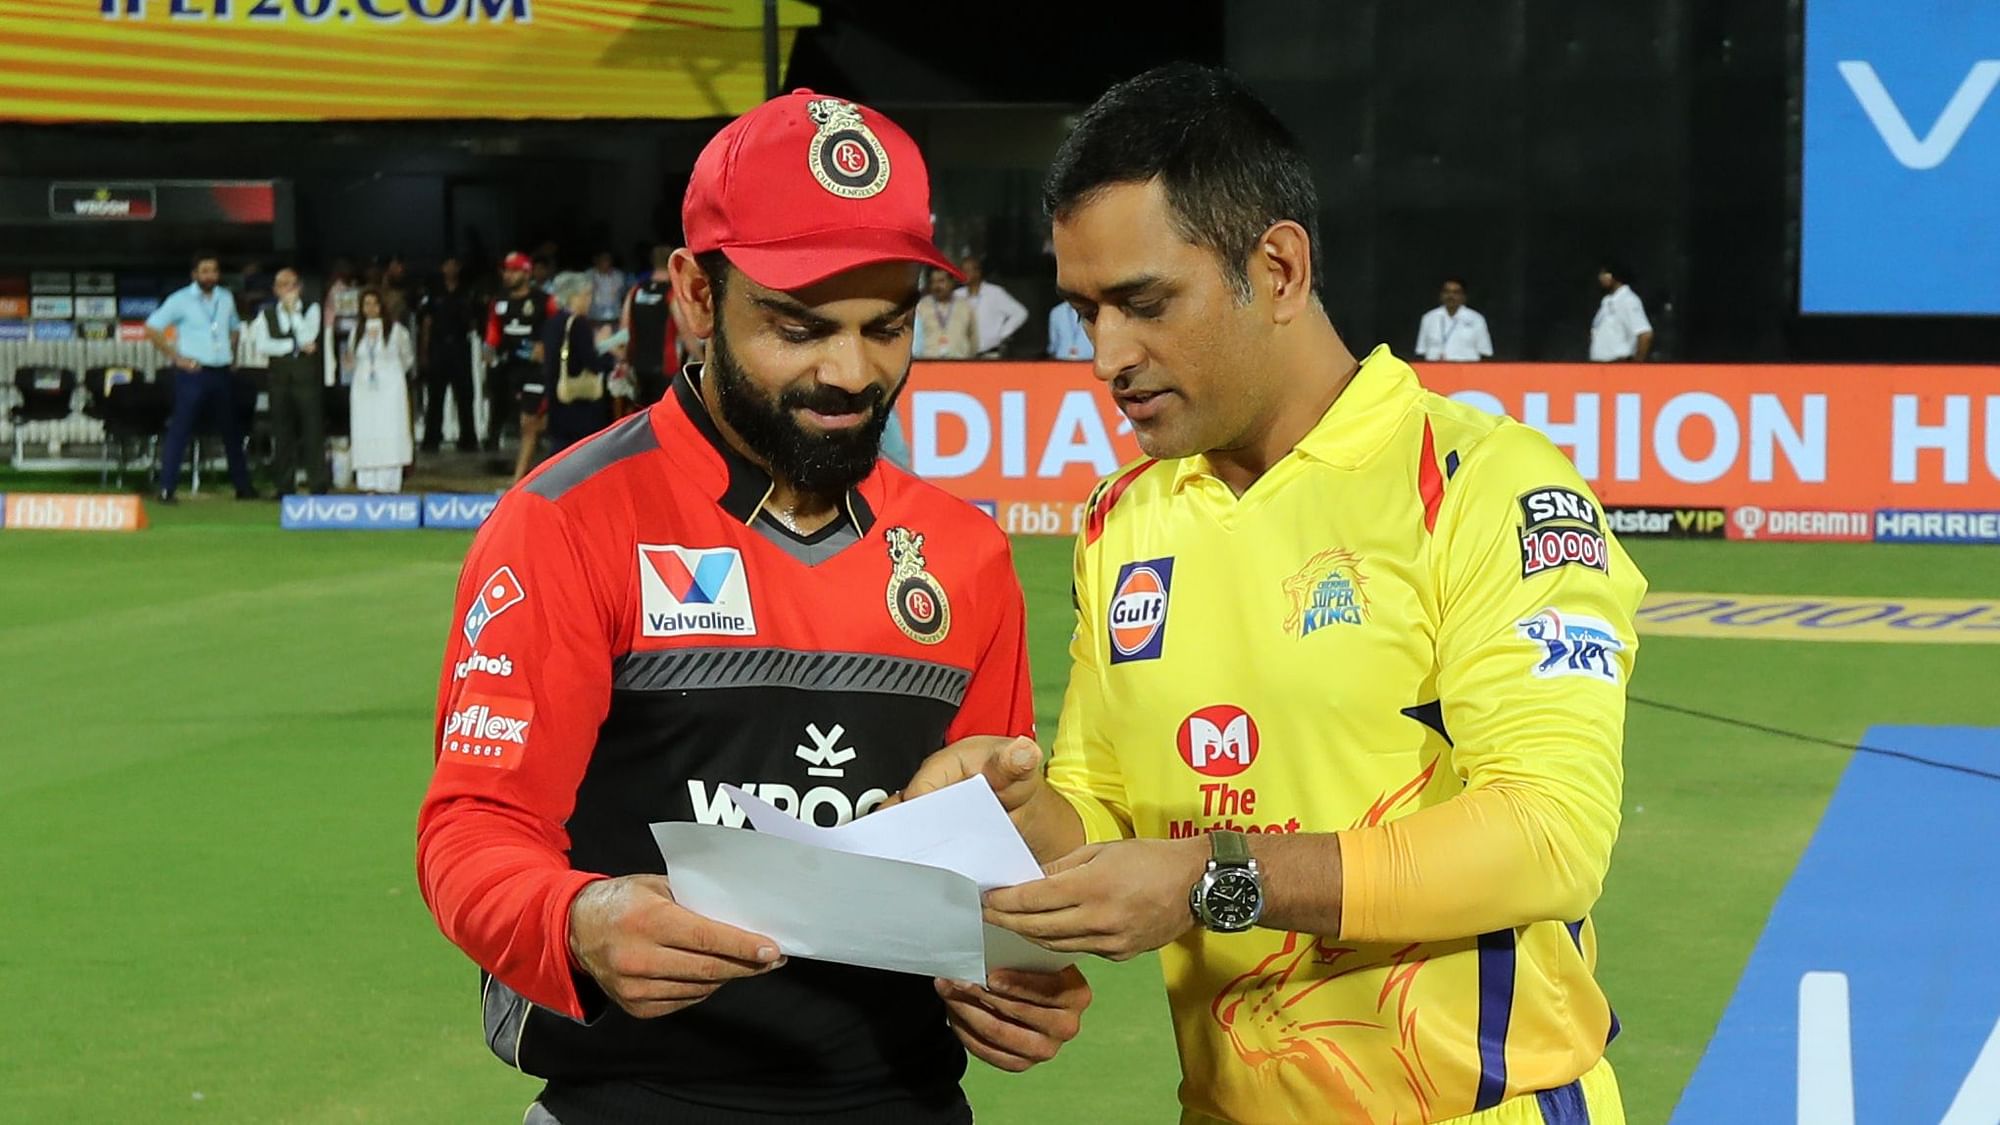 Captains Mahendra Singh Dhoni and Virat Kohli expressed their dissatisfaction over the slowness of the Chepauk track.